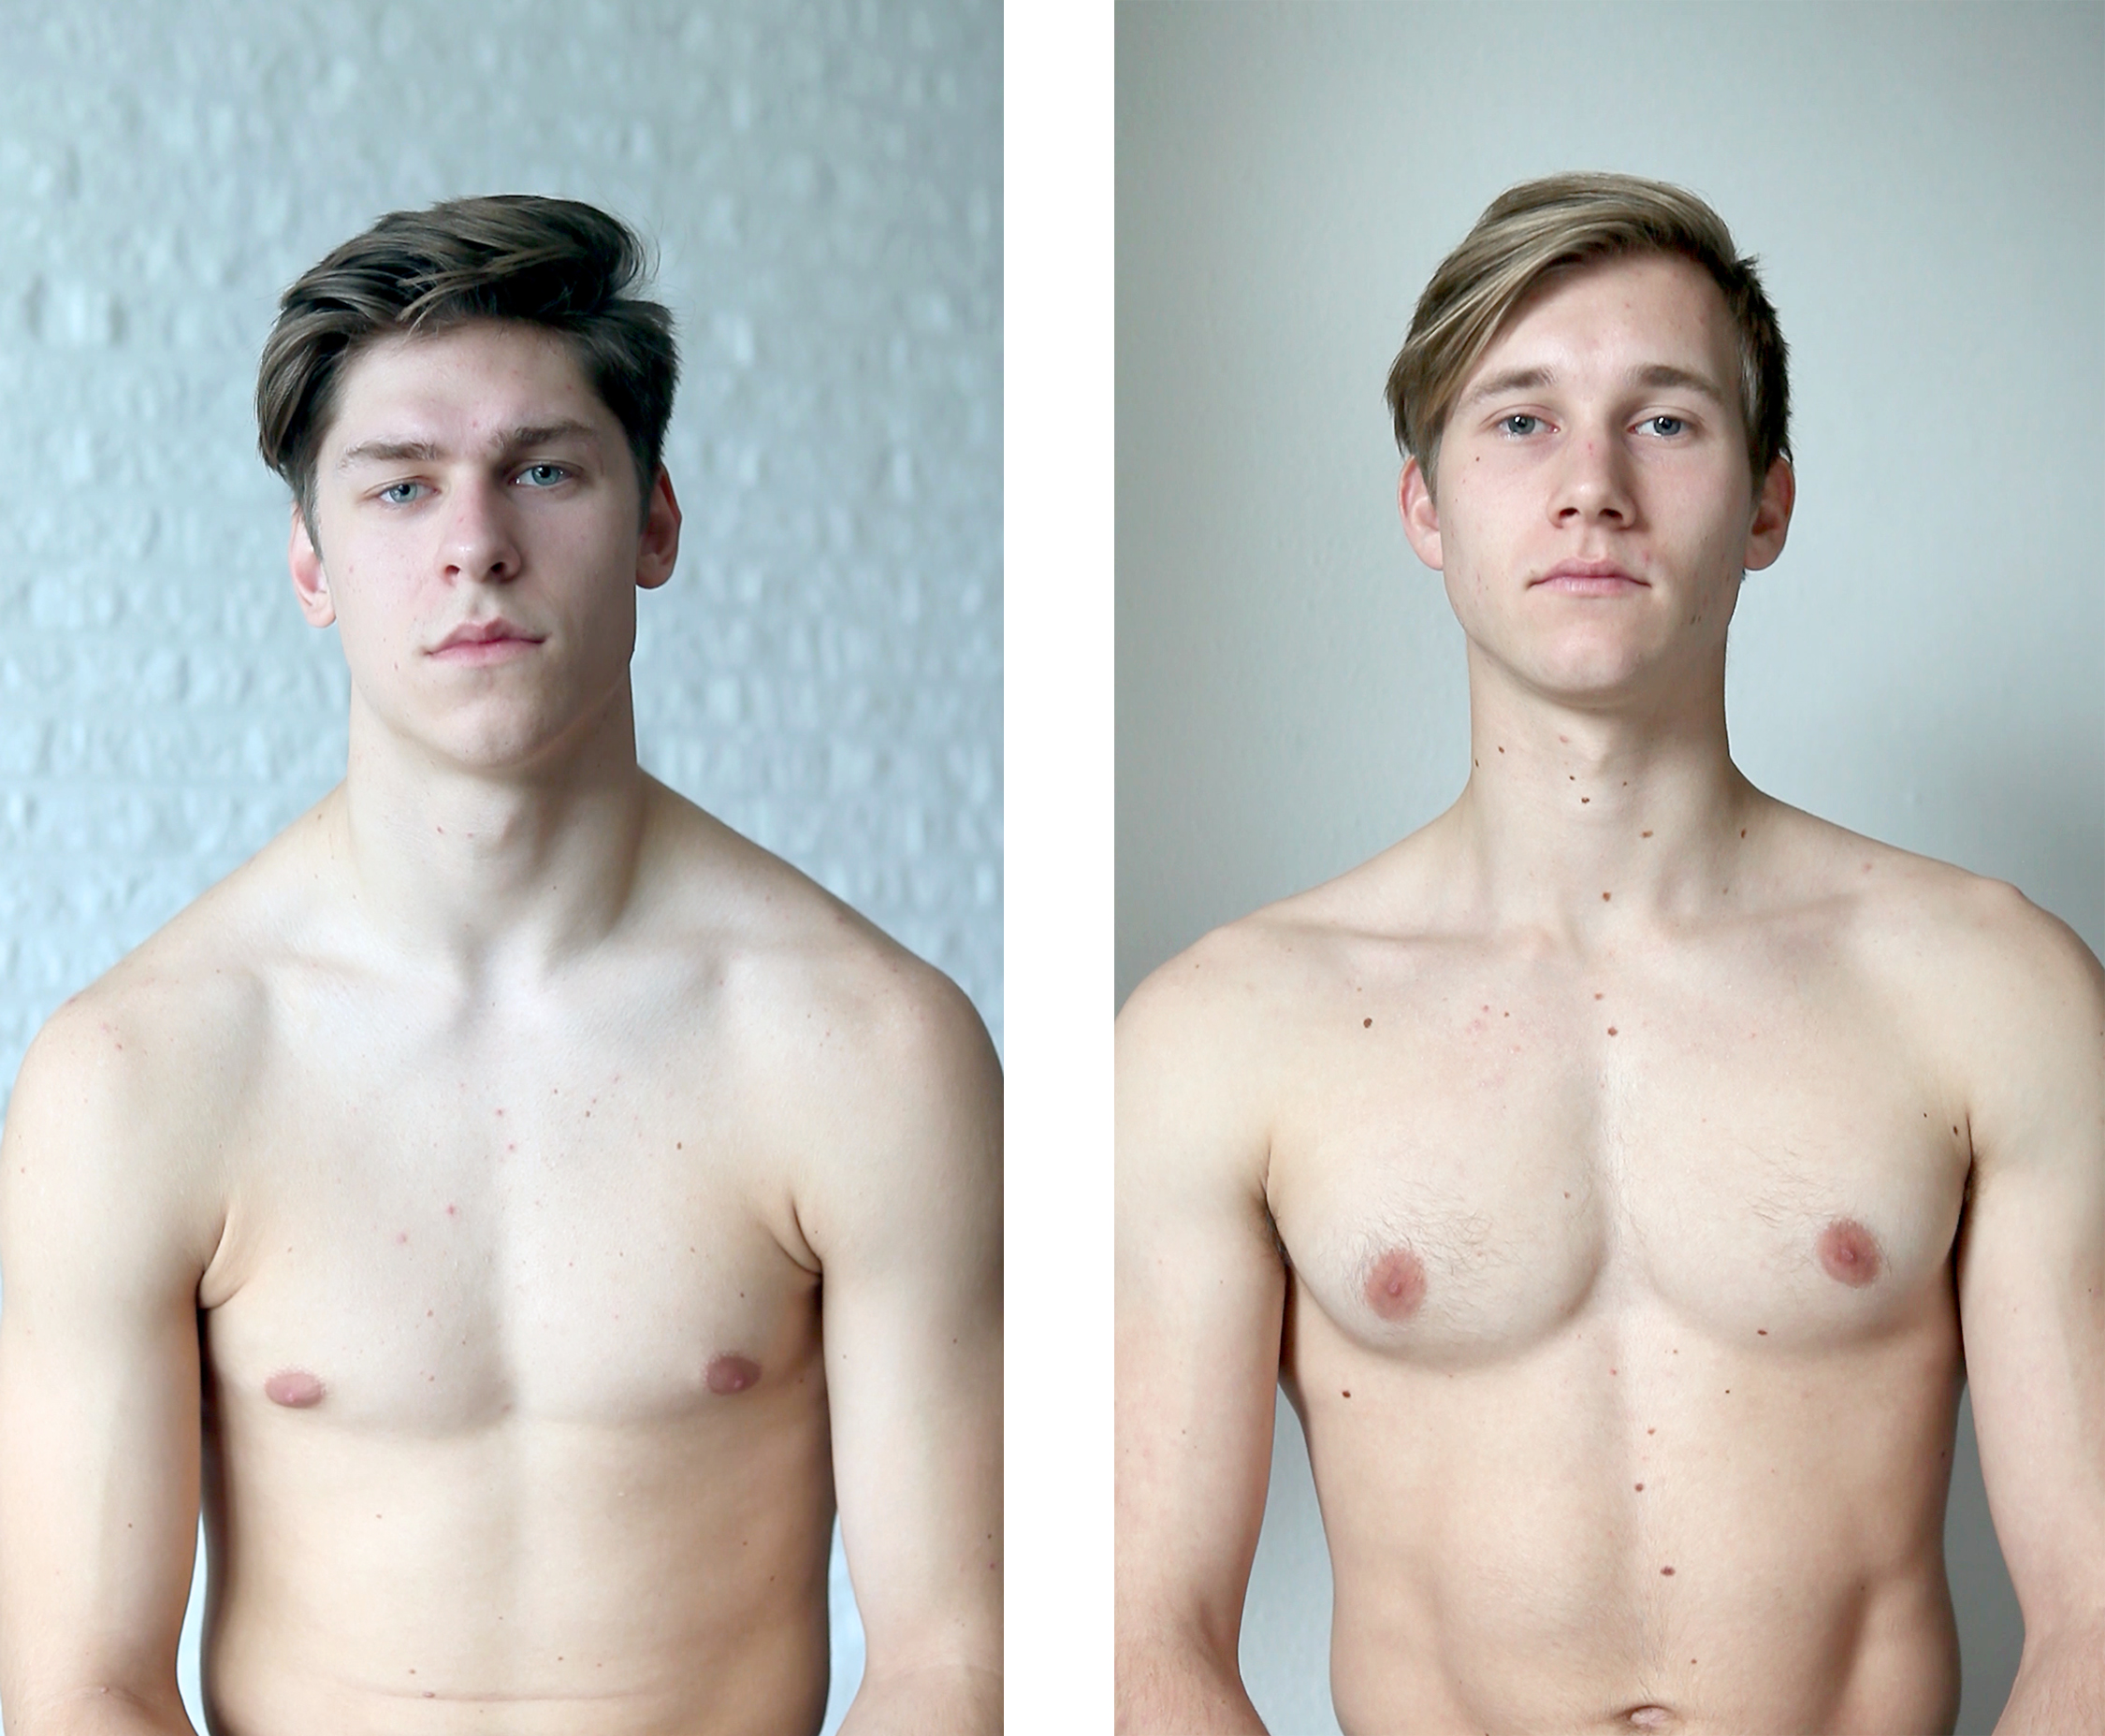 Two vertical video stills of young men, naked from the waist up, and staring directly at the camera.